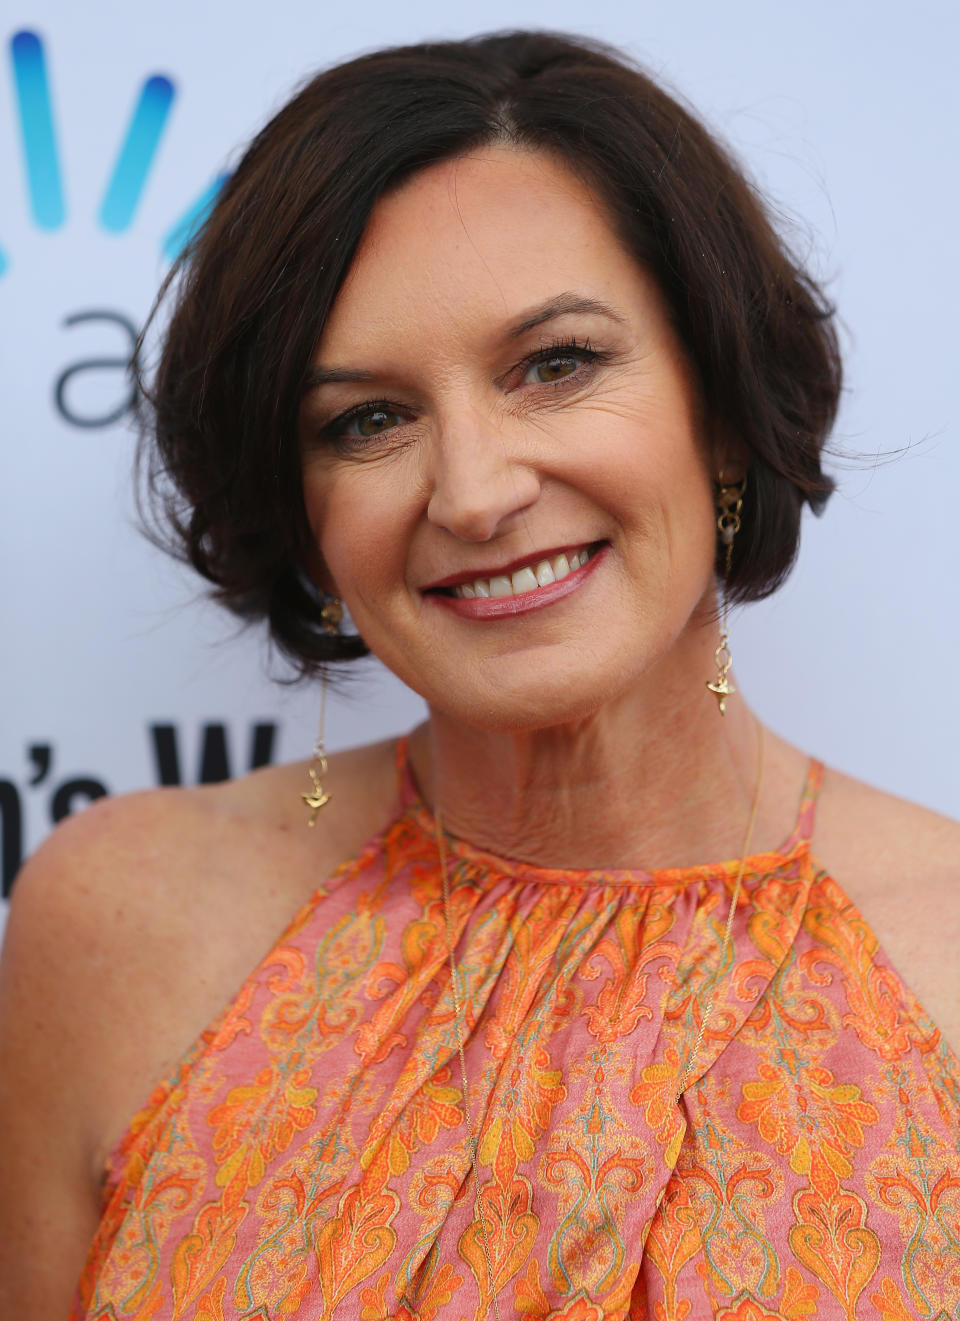 Cassandra Thorburn is currently starring on Dancing With The Stars. Source: Getty